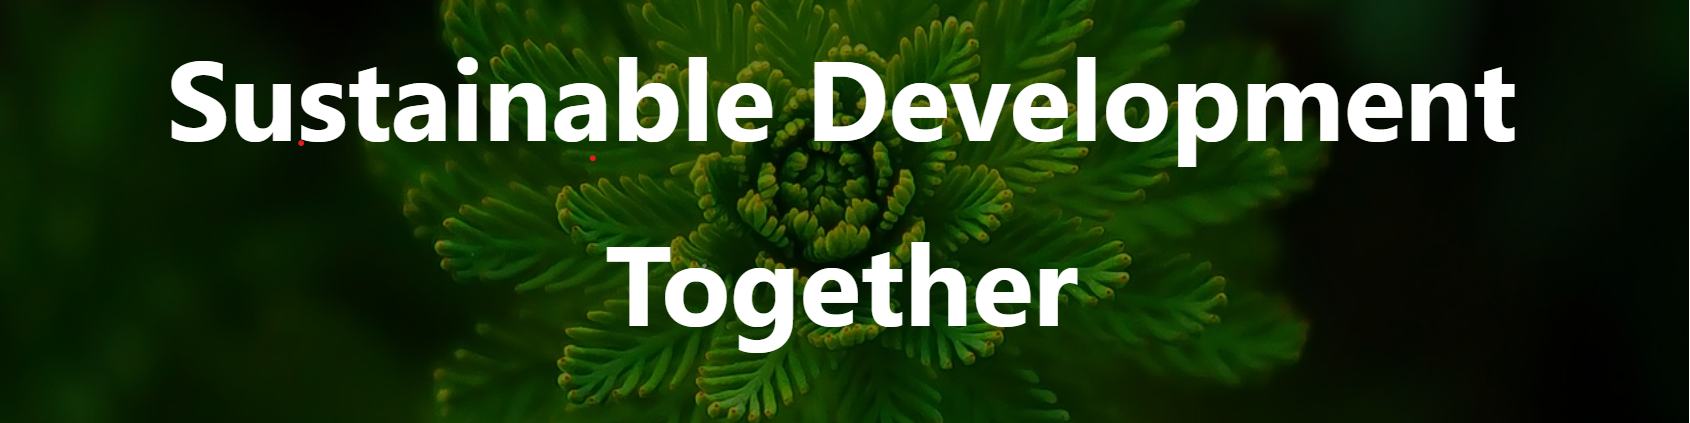 Sustainable Development Together